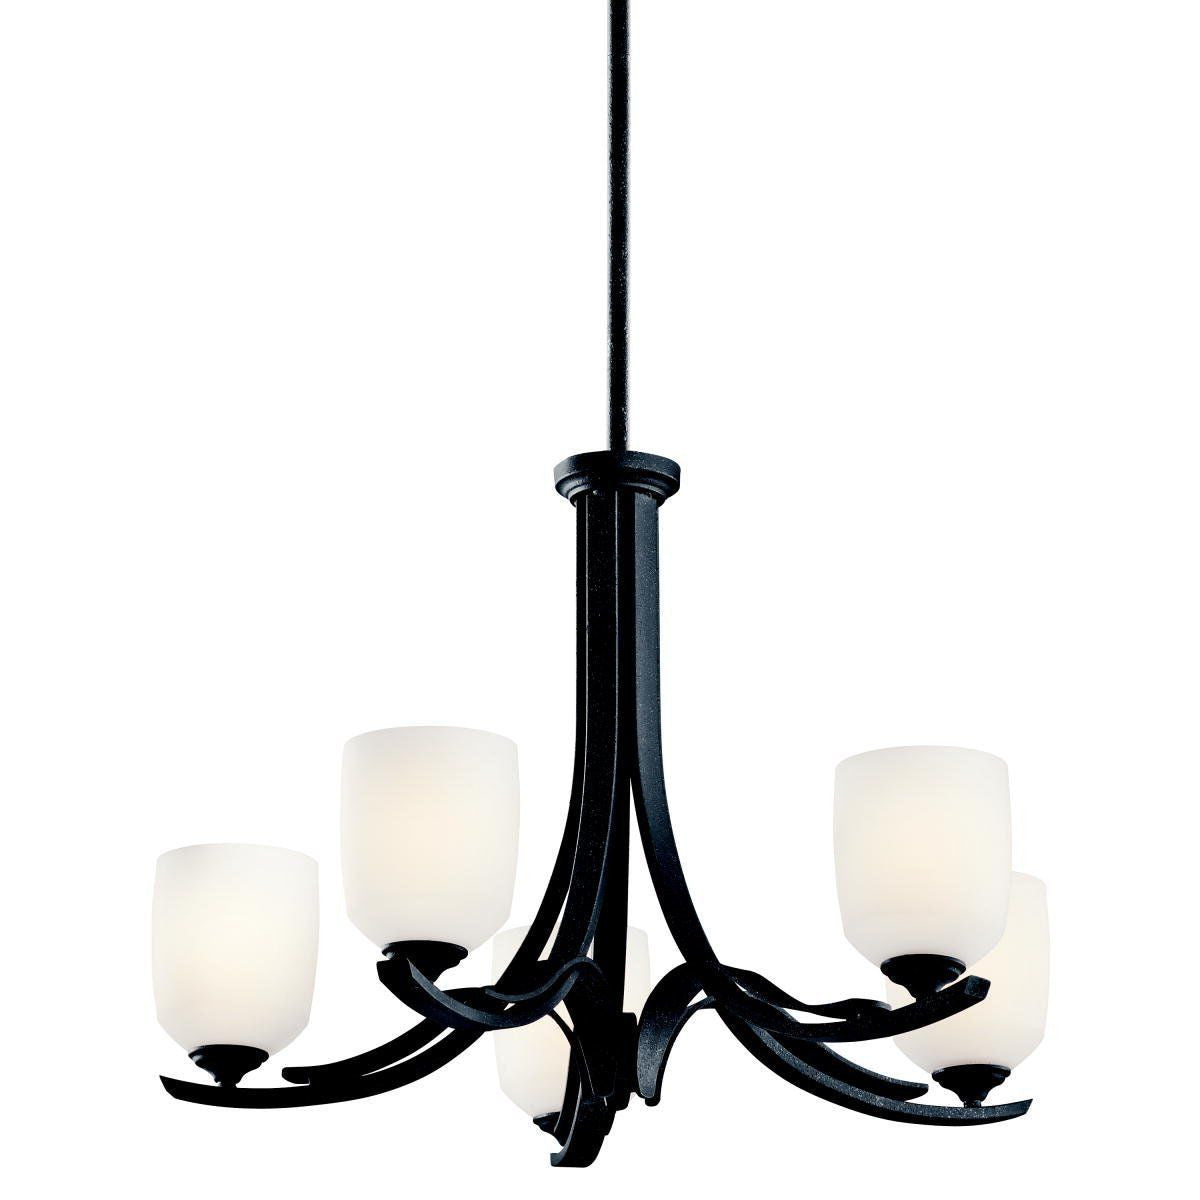 Aztec 34962 by Kichler Lighting Breton Mills Collection Five Light Hanging Mini Chandelier in Distressed Black Finish